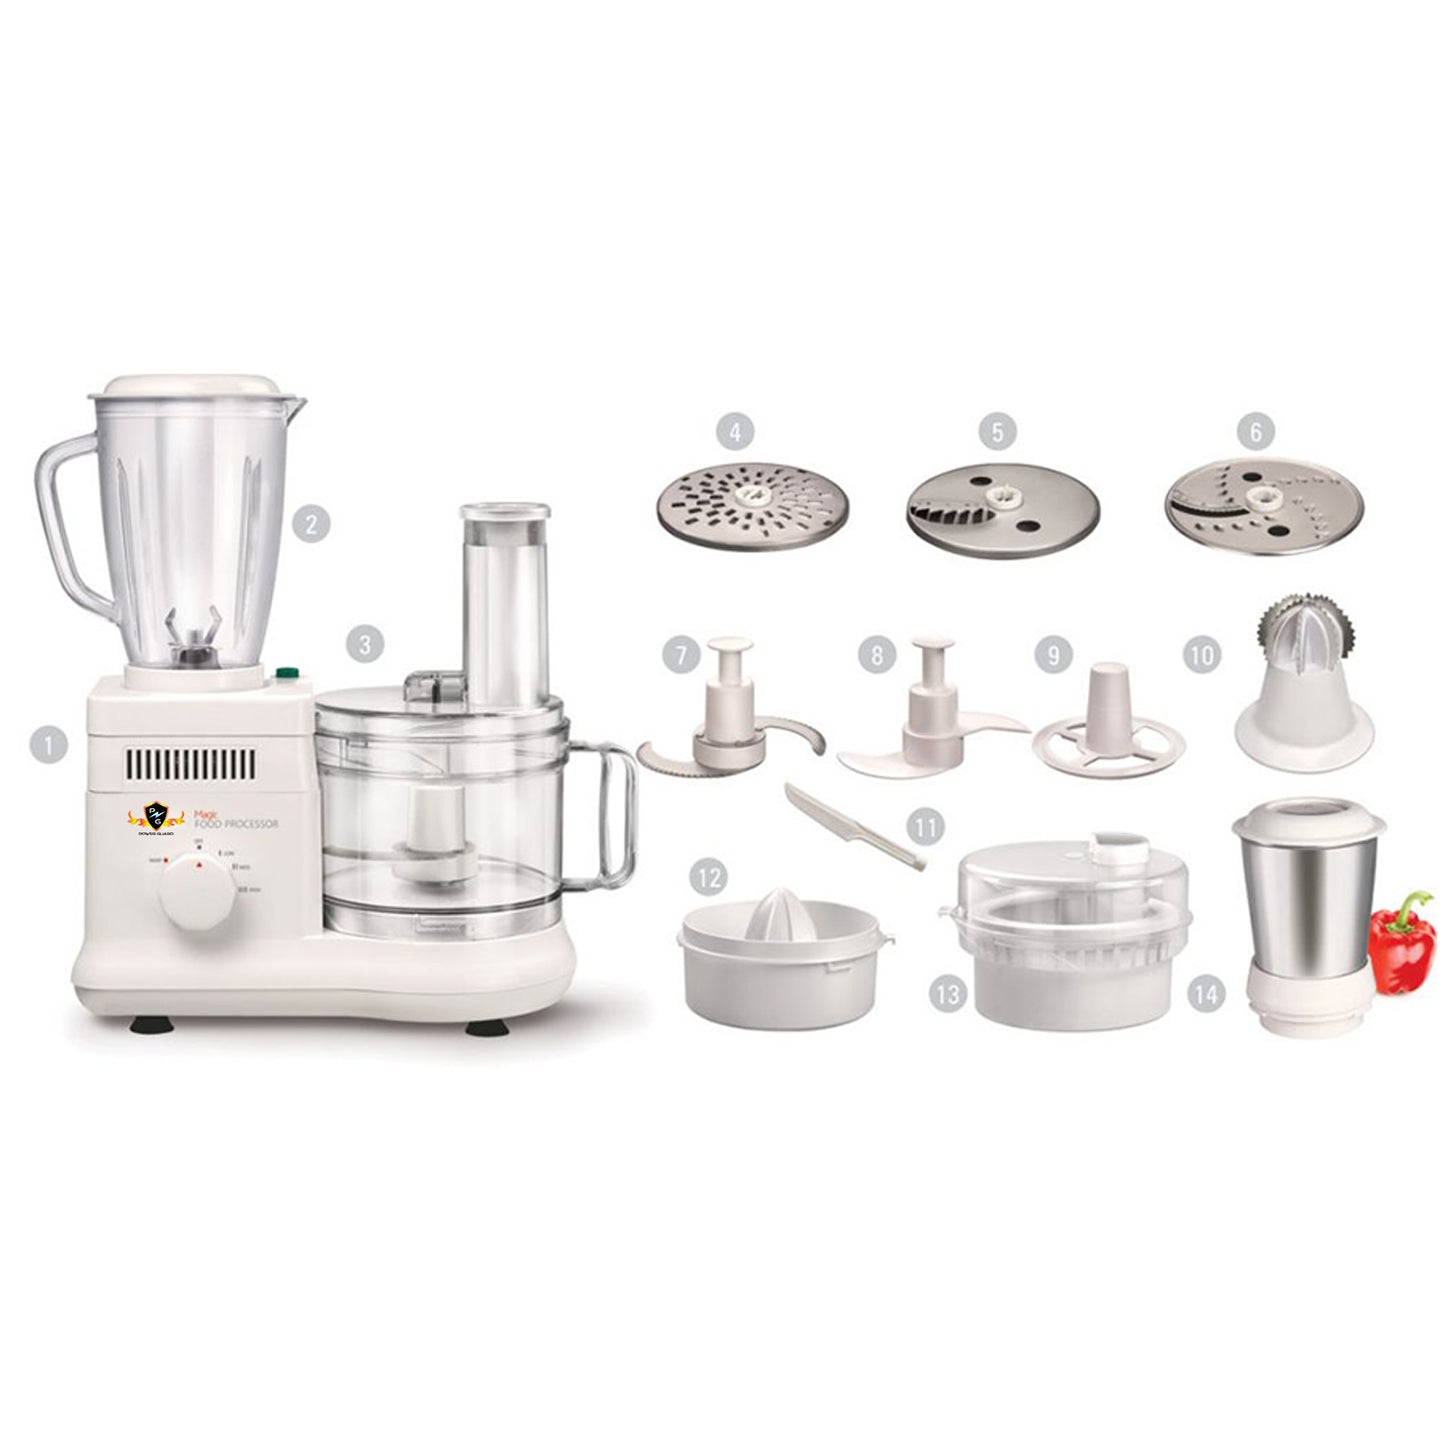 Food Processor: Power Guard Food Processor 650 Watts with 12 Attachments